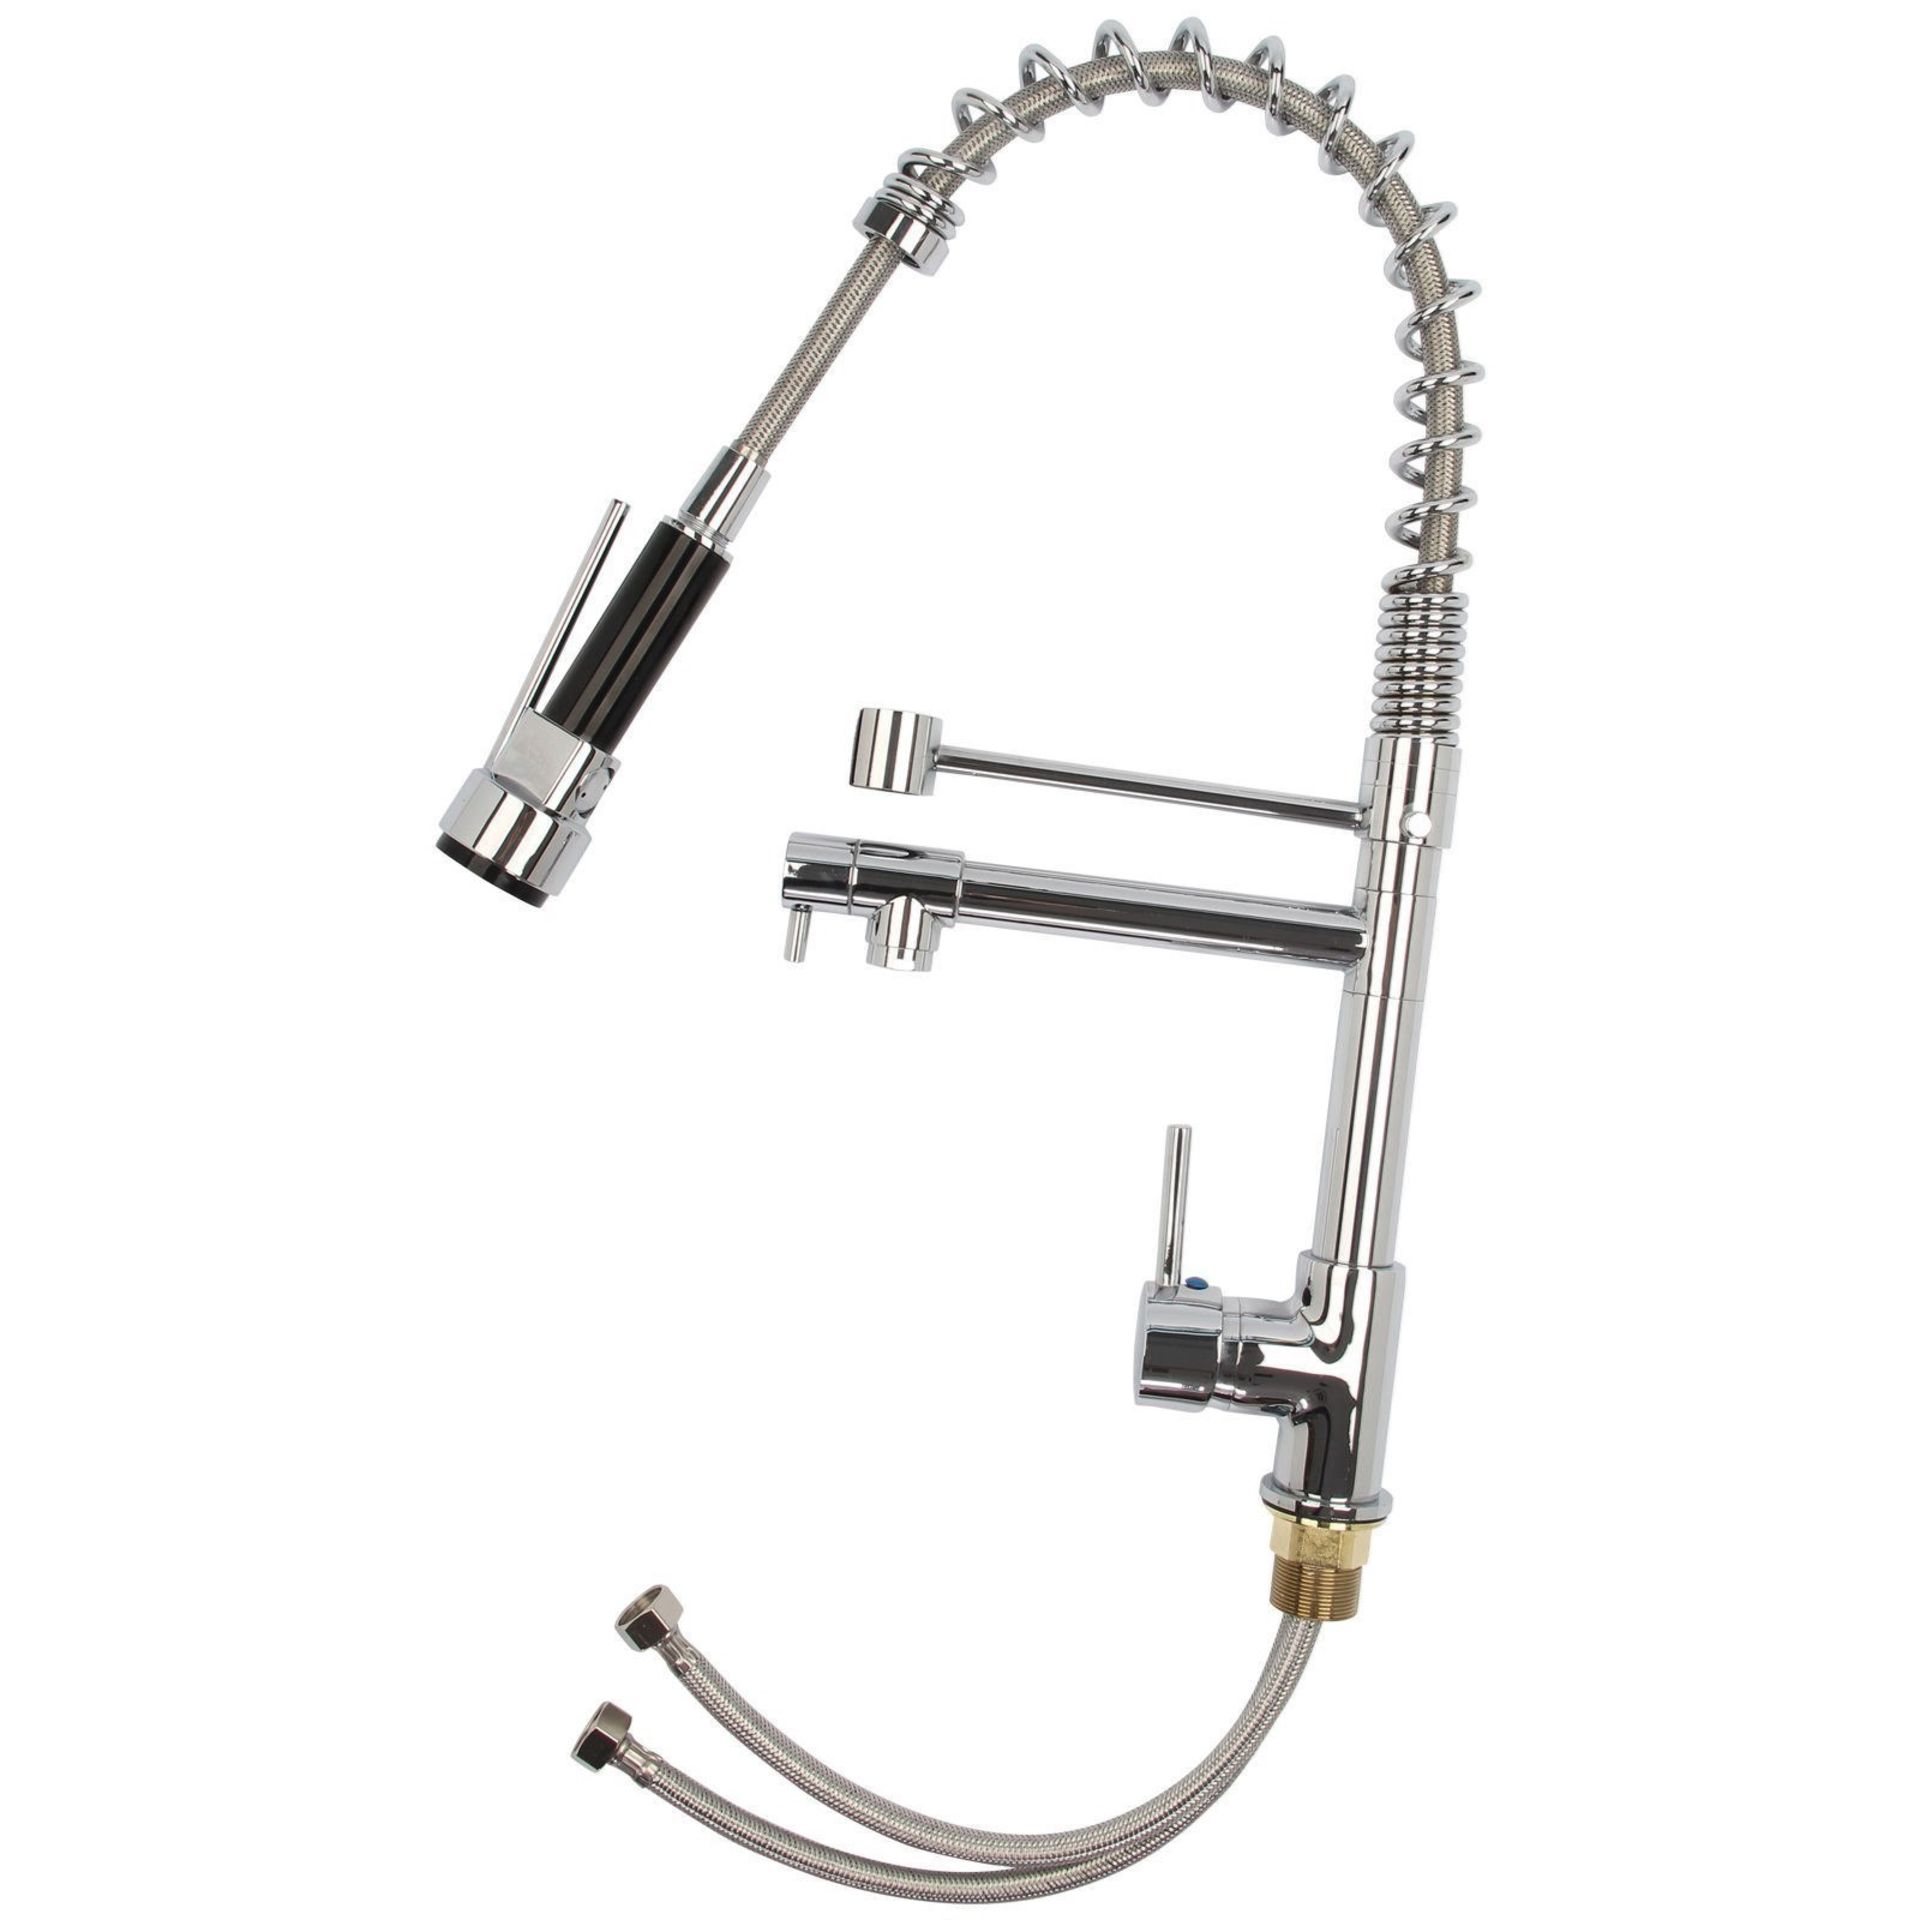 (MC220) Bentley Modern Monobloc Chrome Brass Pull Out Spray Mixer Tap. RRP £349.99. This tap is from - Image 2 of 4